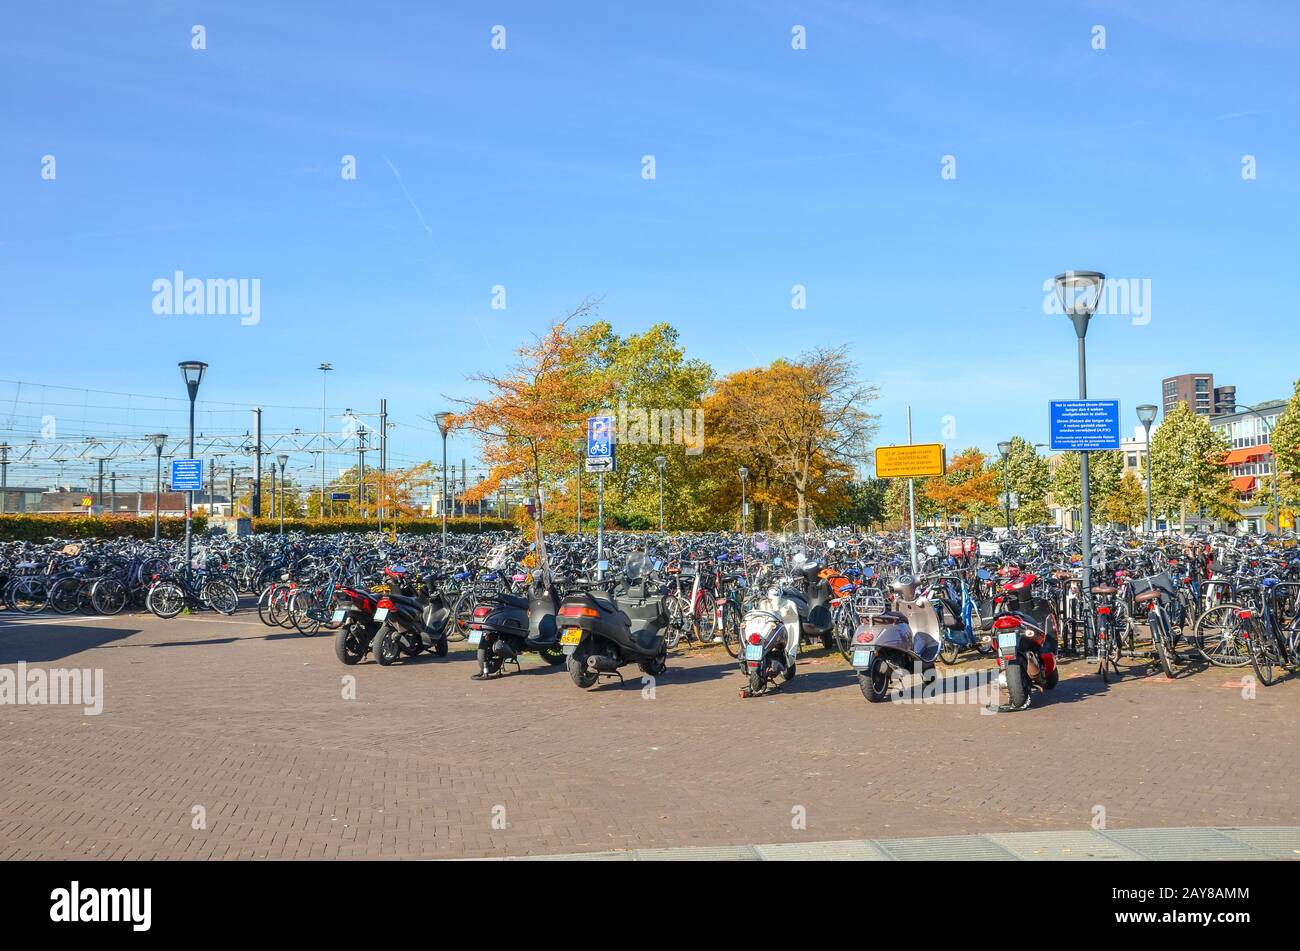 Venlo, Limburg, Netherlands - October 13, 2018: Rows of parked bicycles and motorcycles in the Dutch city close to the main train station. City biking. Eco-friendly means of transport. Stock Photo